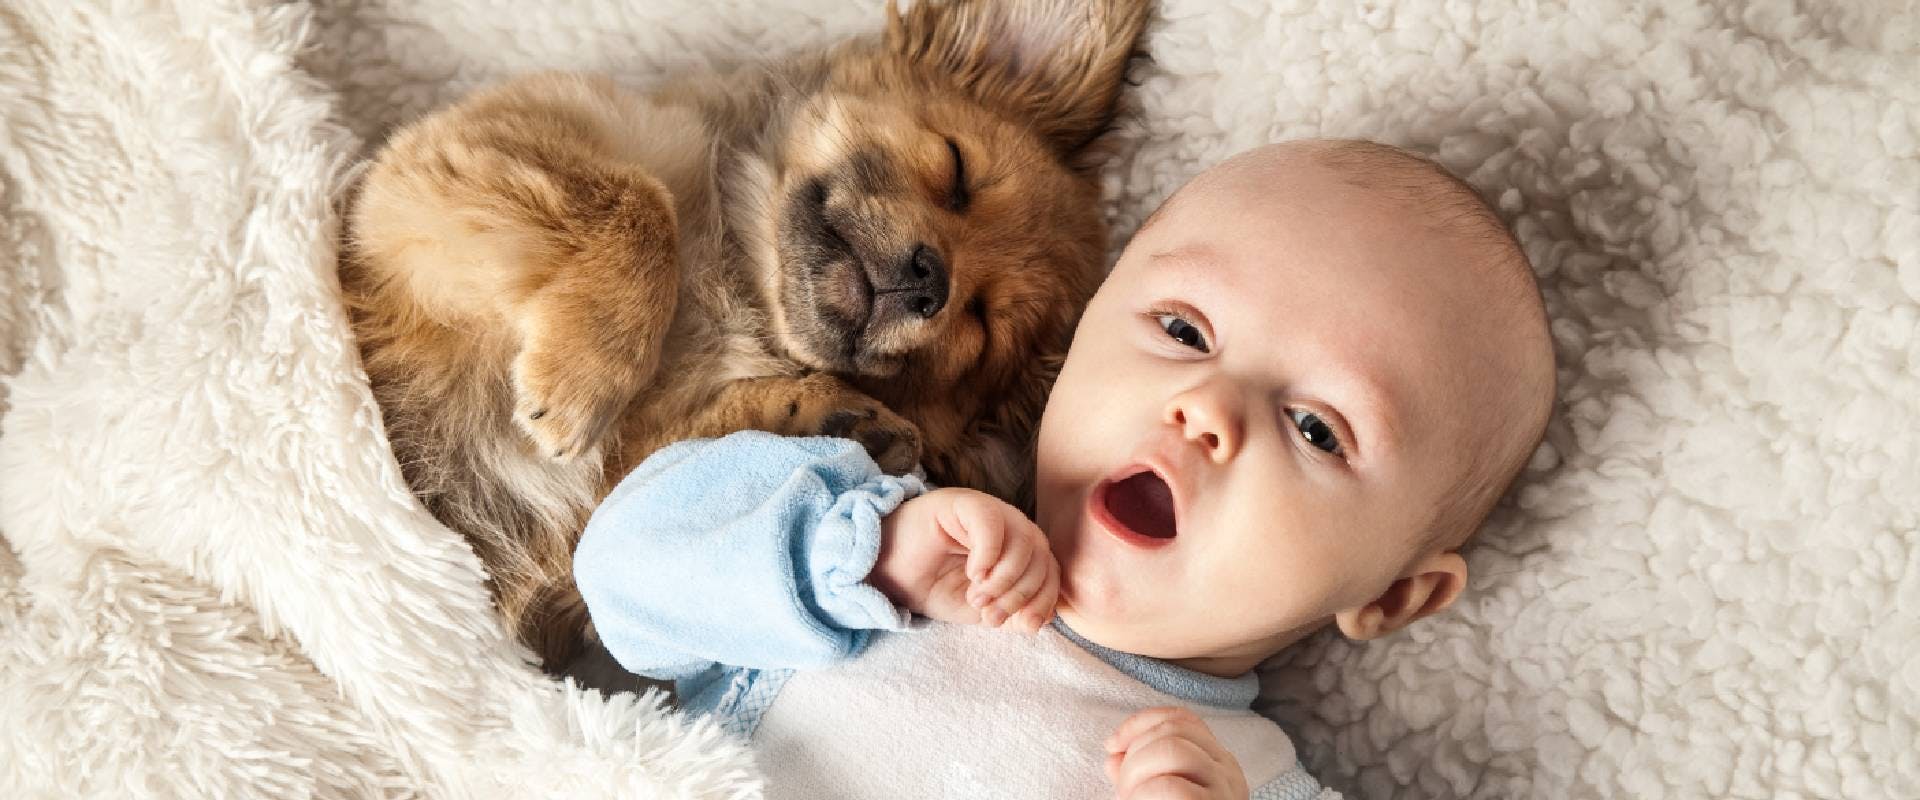 Yawning baby with a puppy